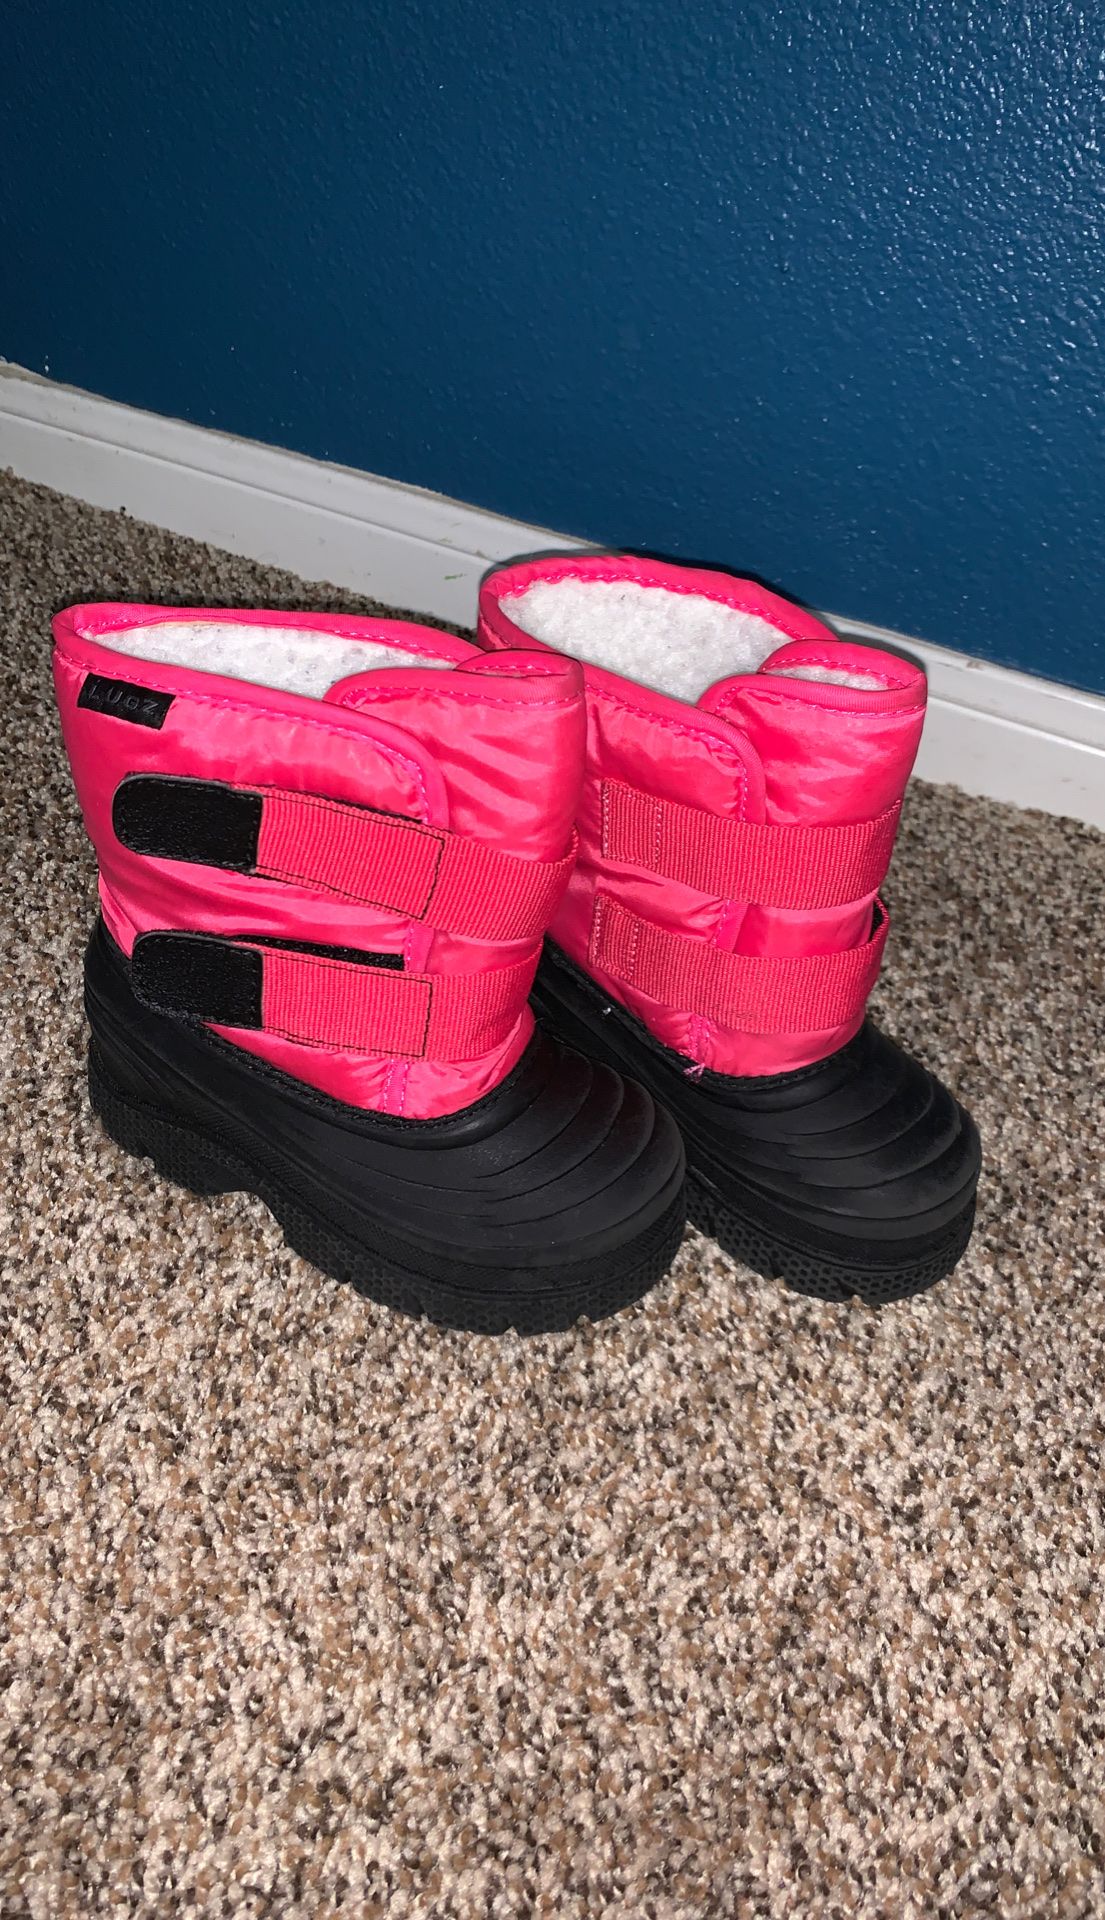 Girls snow boots size 9